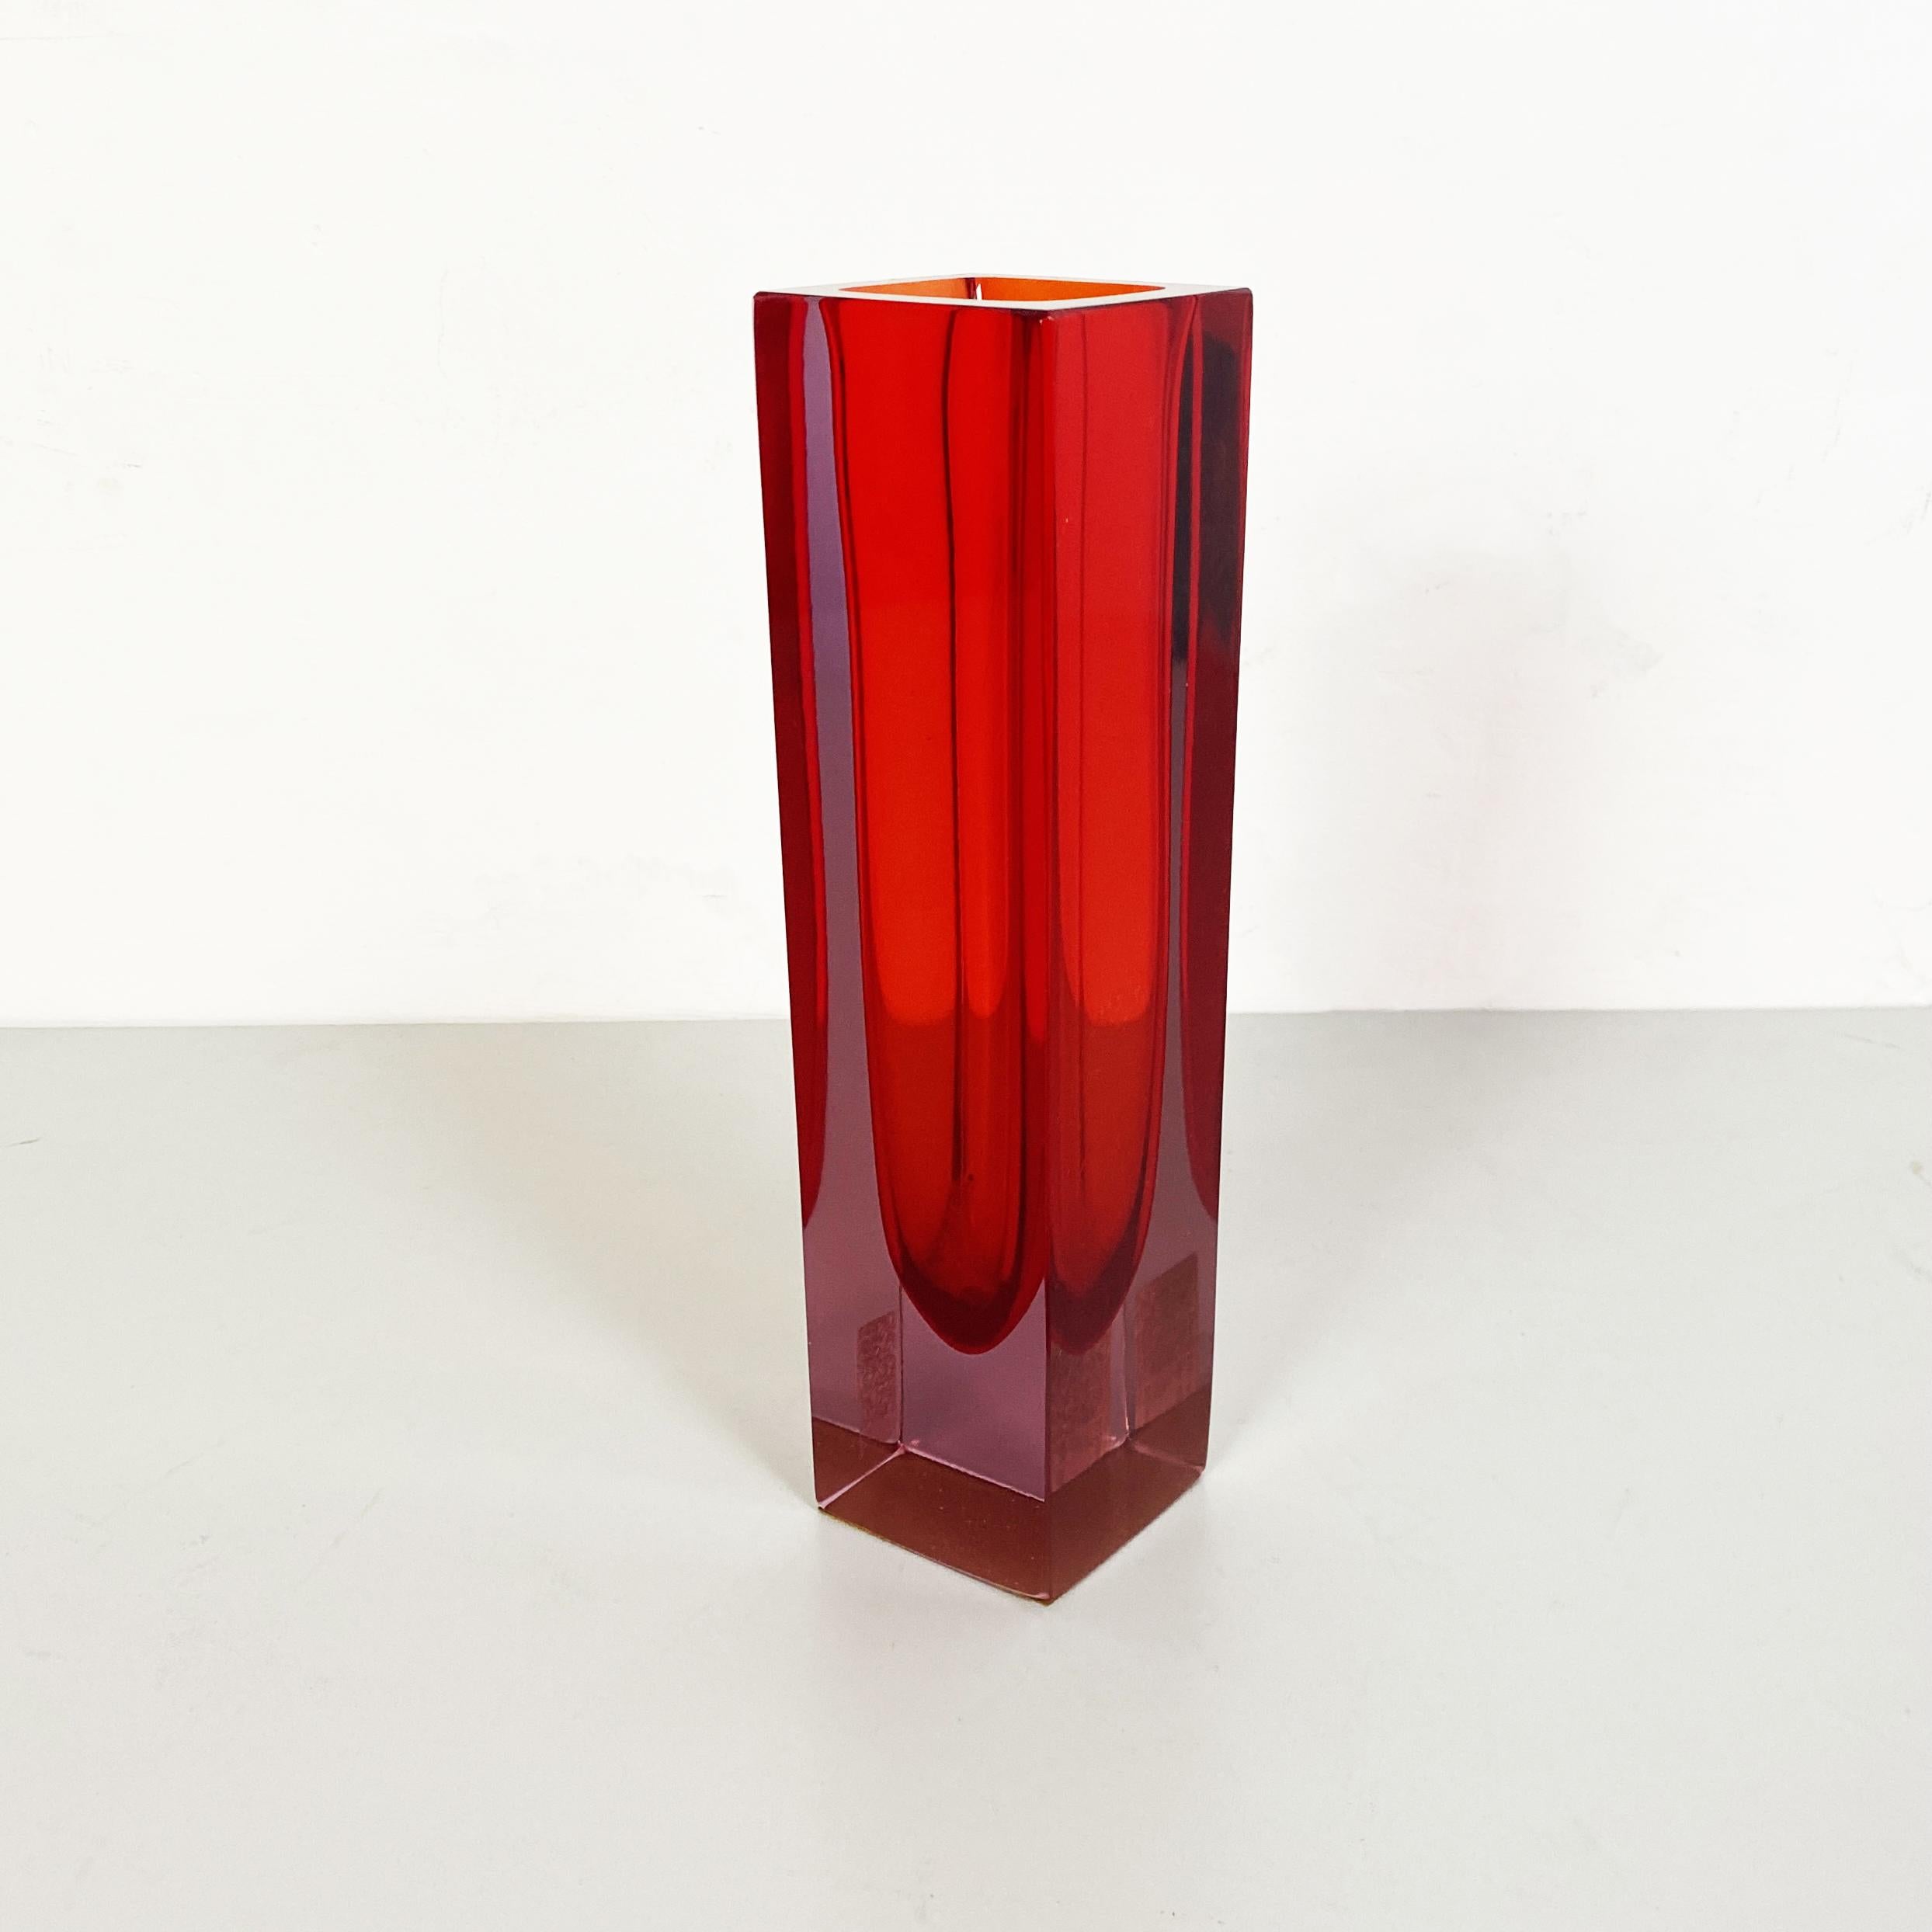 Italian mid-century Red Murano glass vase with internal purple shades, 1970s
Red Murano glass vase with internal purple shades. From the I Sommersi series.
1970s 

Good conditions.

This Fantastic series of Murano glass vase and ashtray with various